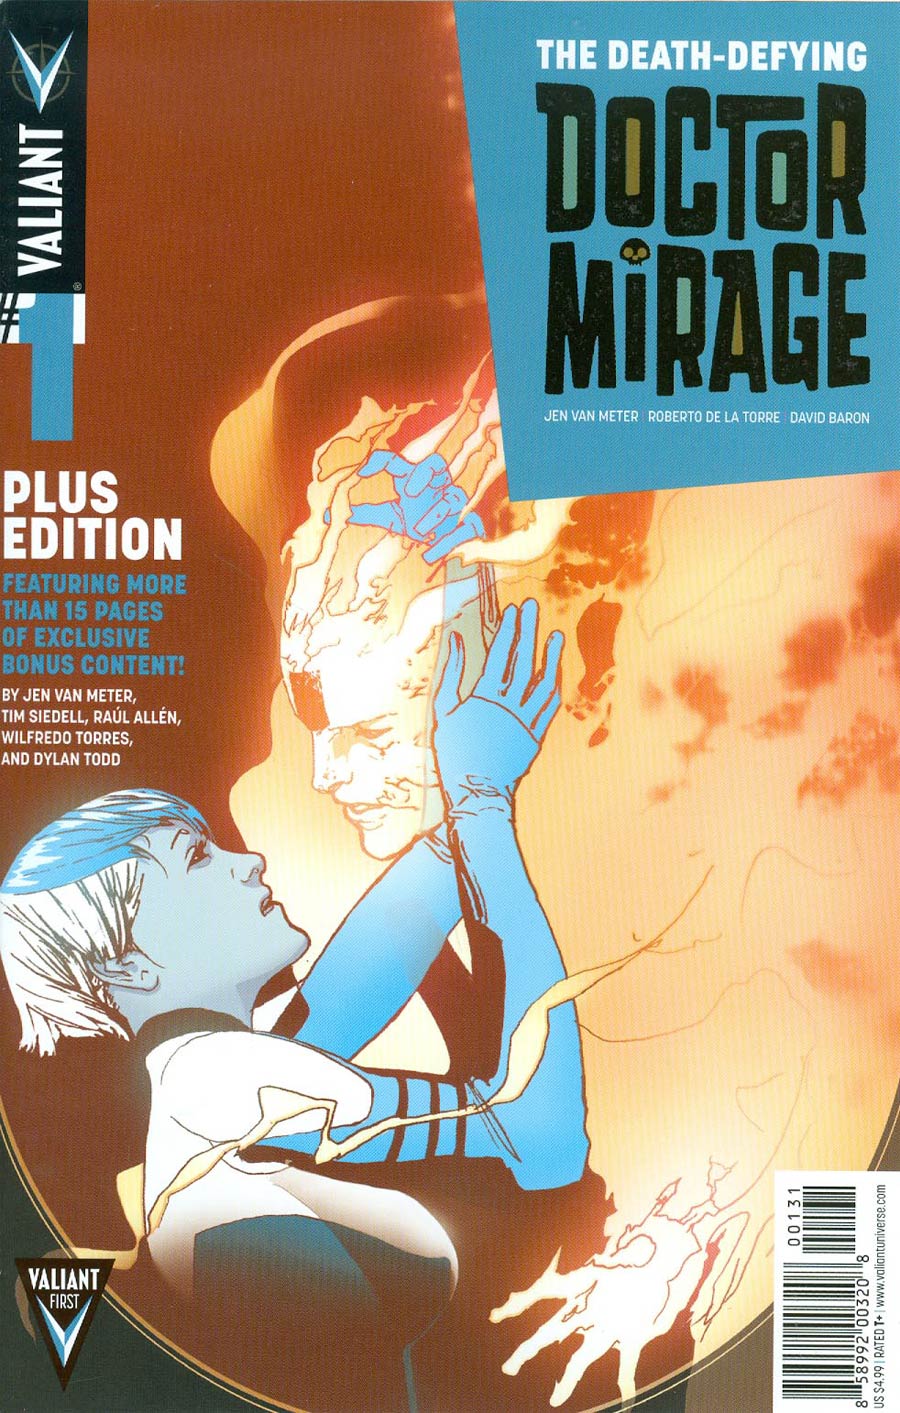 Death-Defying Doctor Mirage #1 Cover C Plus Edition